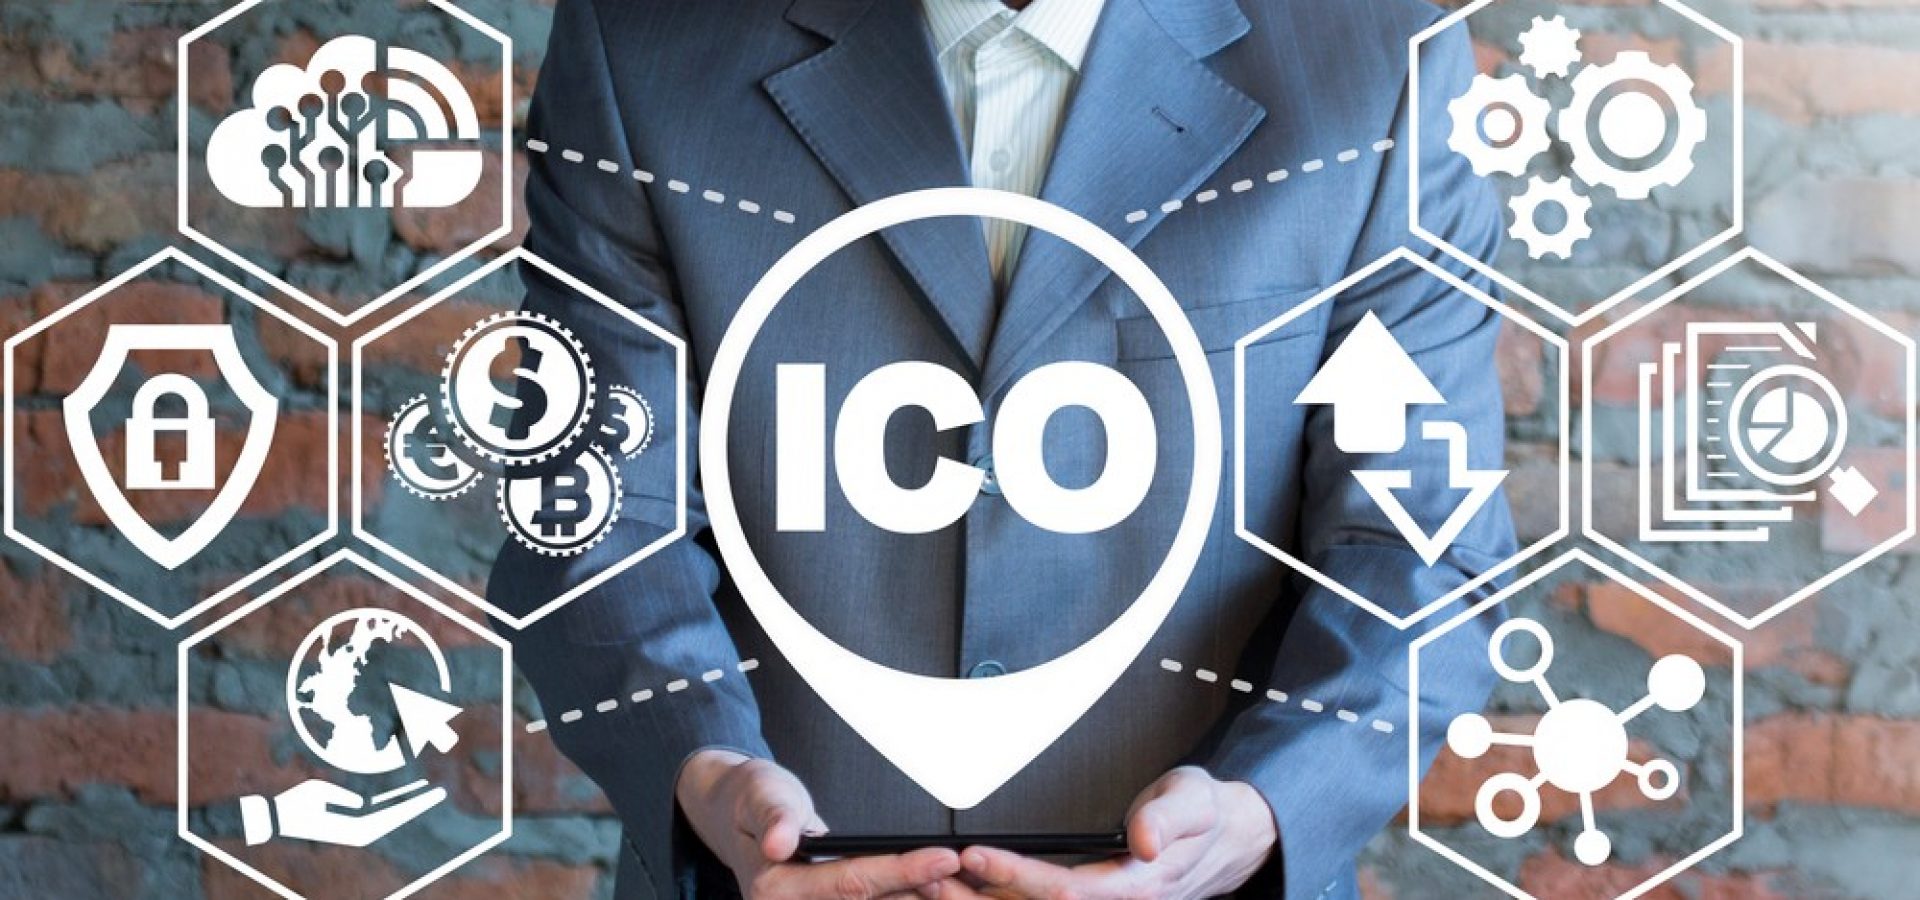 How to launch your own ICO? Your guide for essential steps